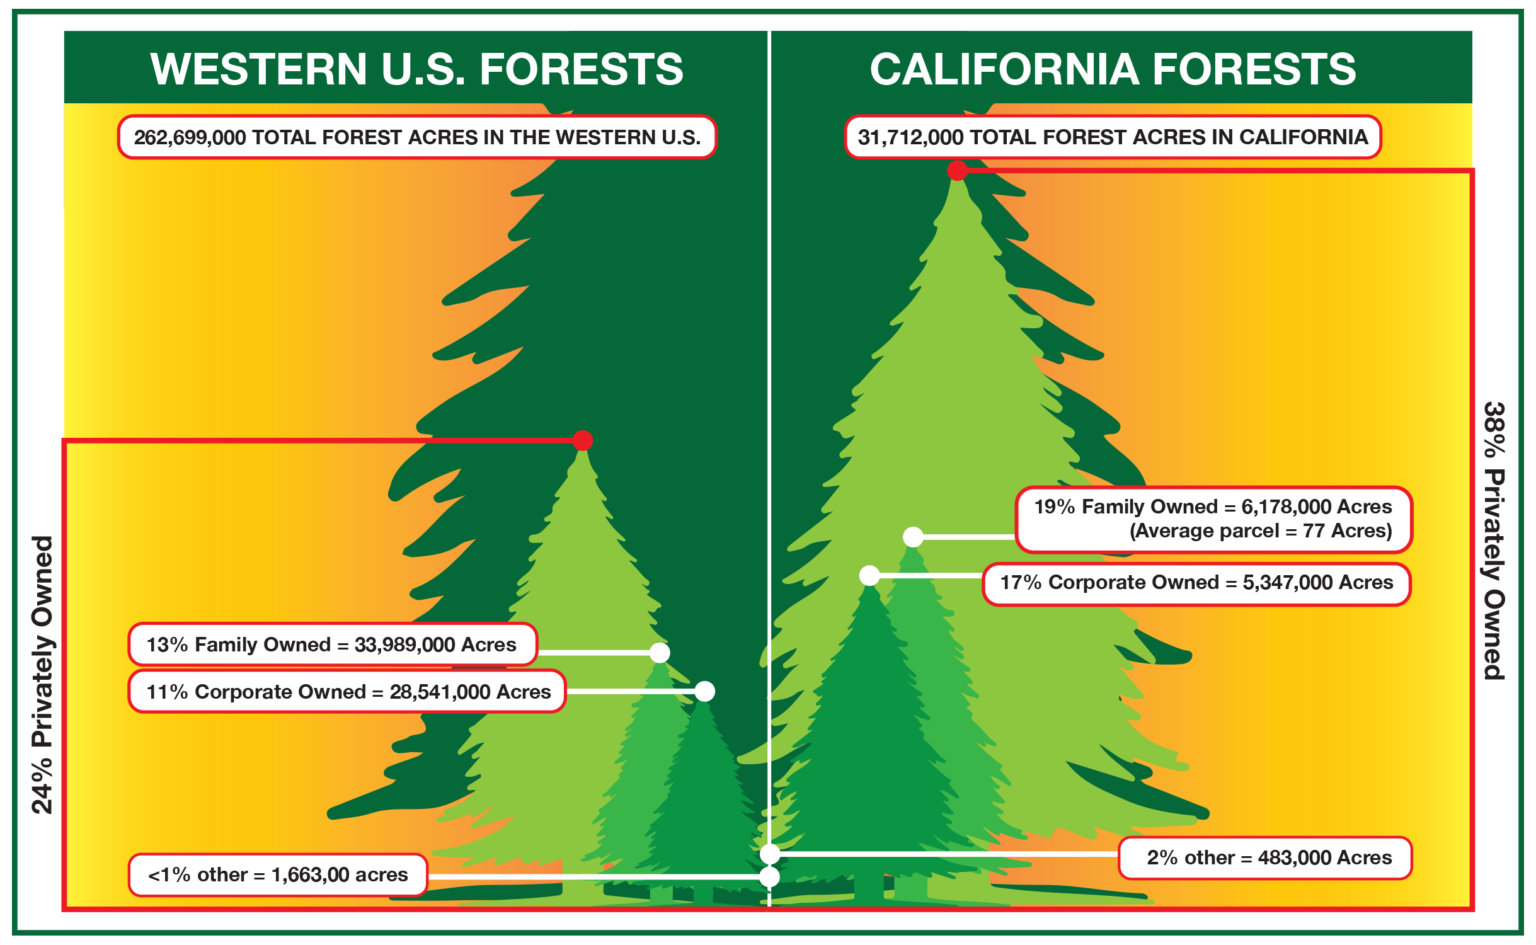 infographic comparing forest acreage under state, federal and private ownership in CA. Graphic shows this by size of green tree icons against a deep yellow background